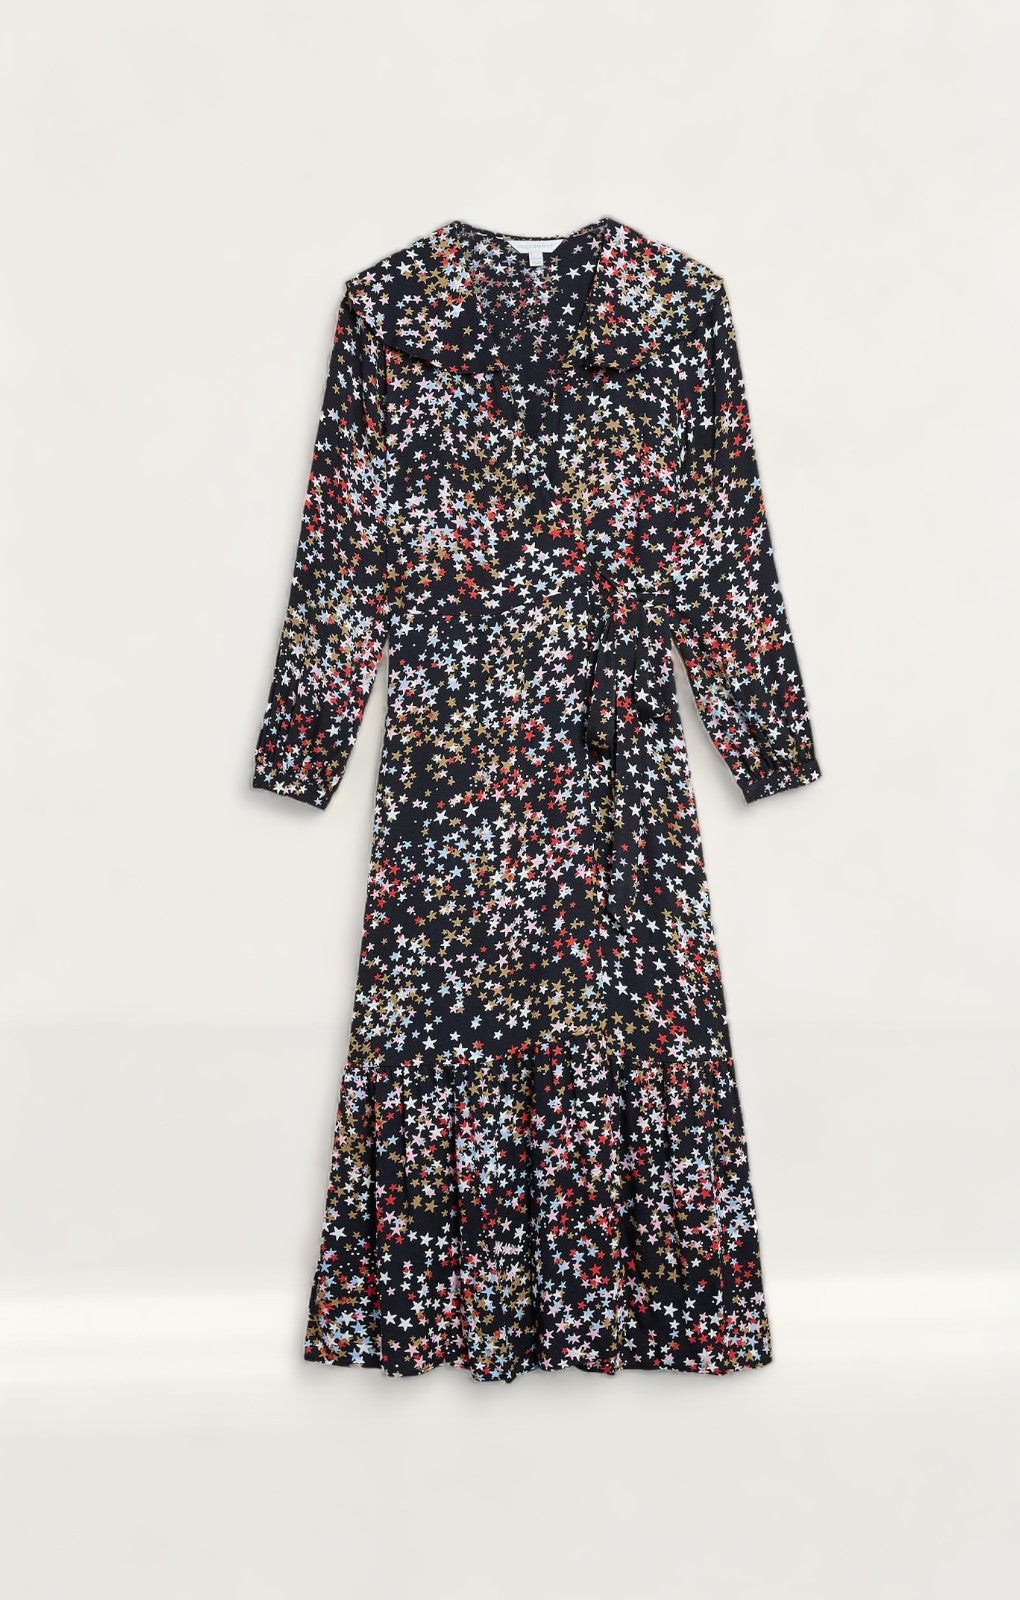 M&S X Ghost Star Wrap Dress product image